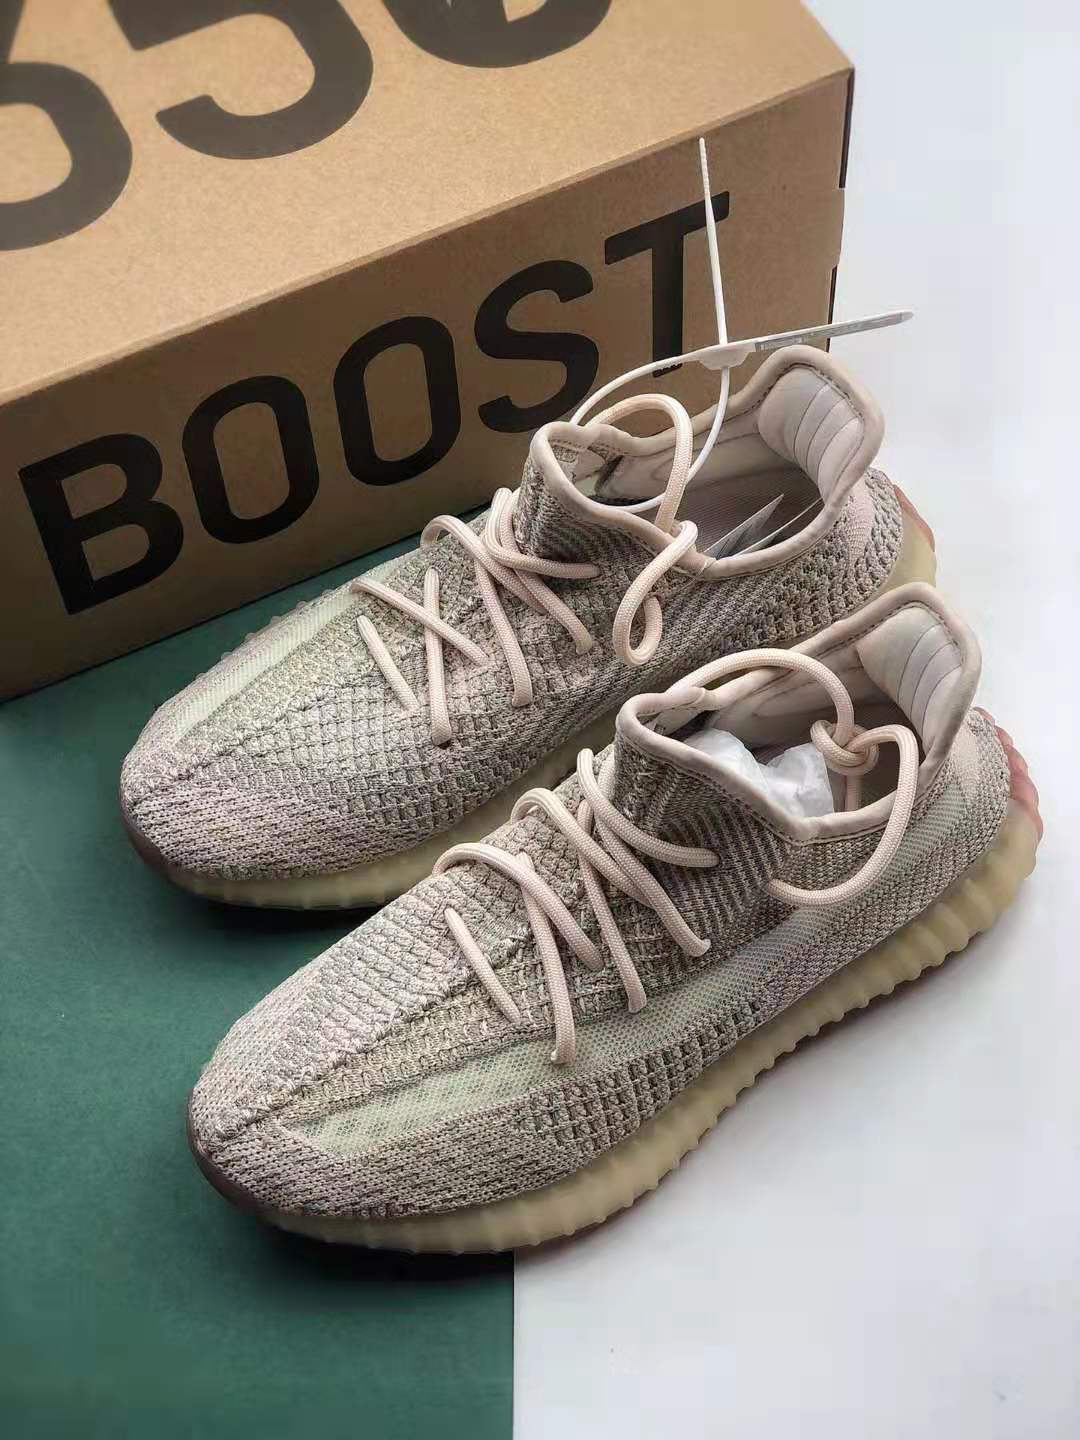 Adidas Yeezy Boost 350 V2 Citrin Non-Reflective FW3042 - Buy Now!